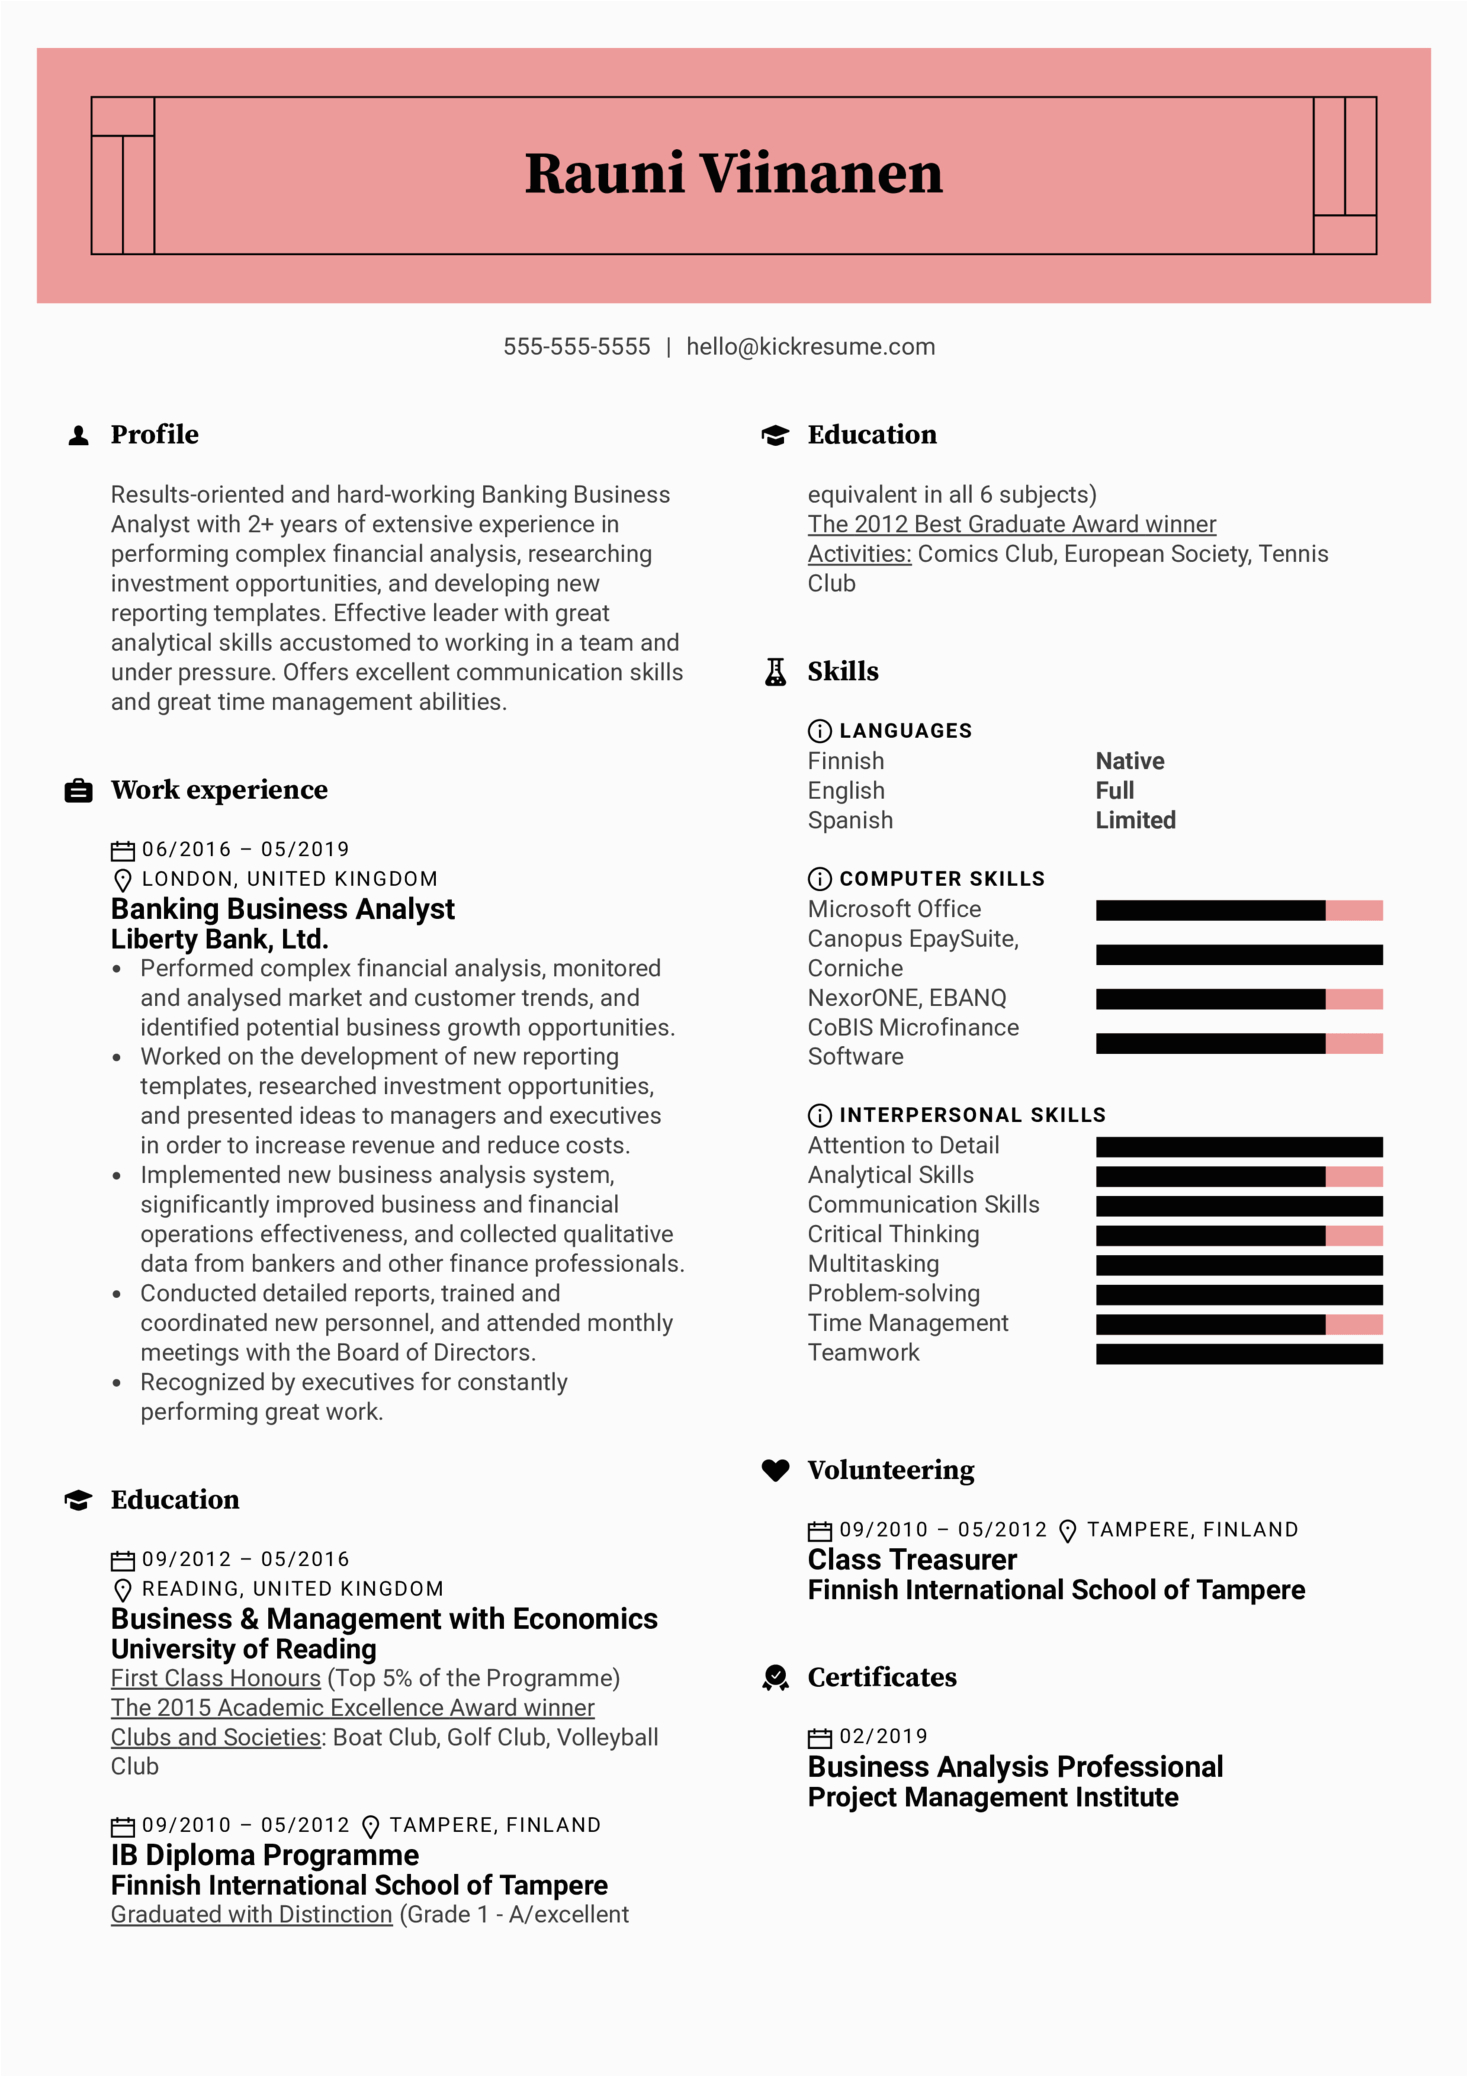 Sample Resume for Business Analyst In Banking Domain Banking Business Analyst Resume Sample